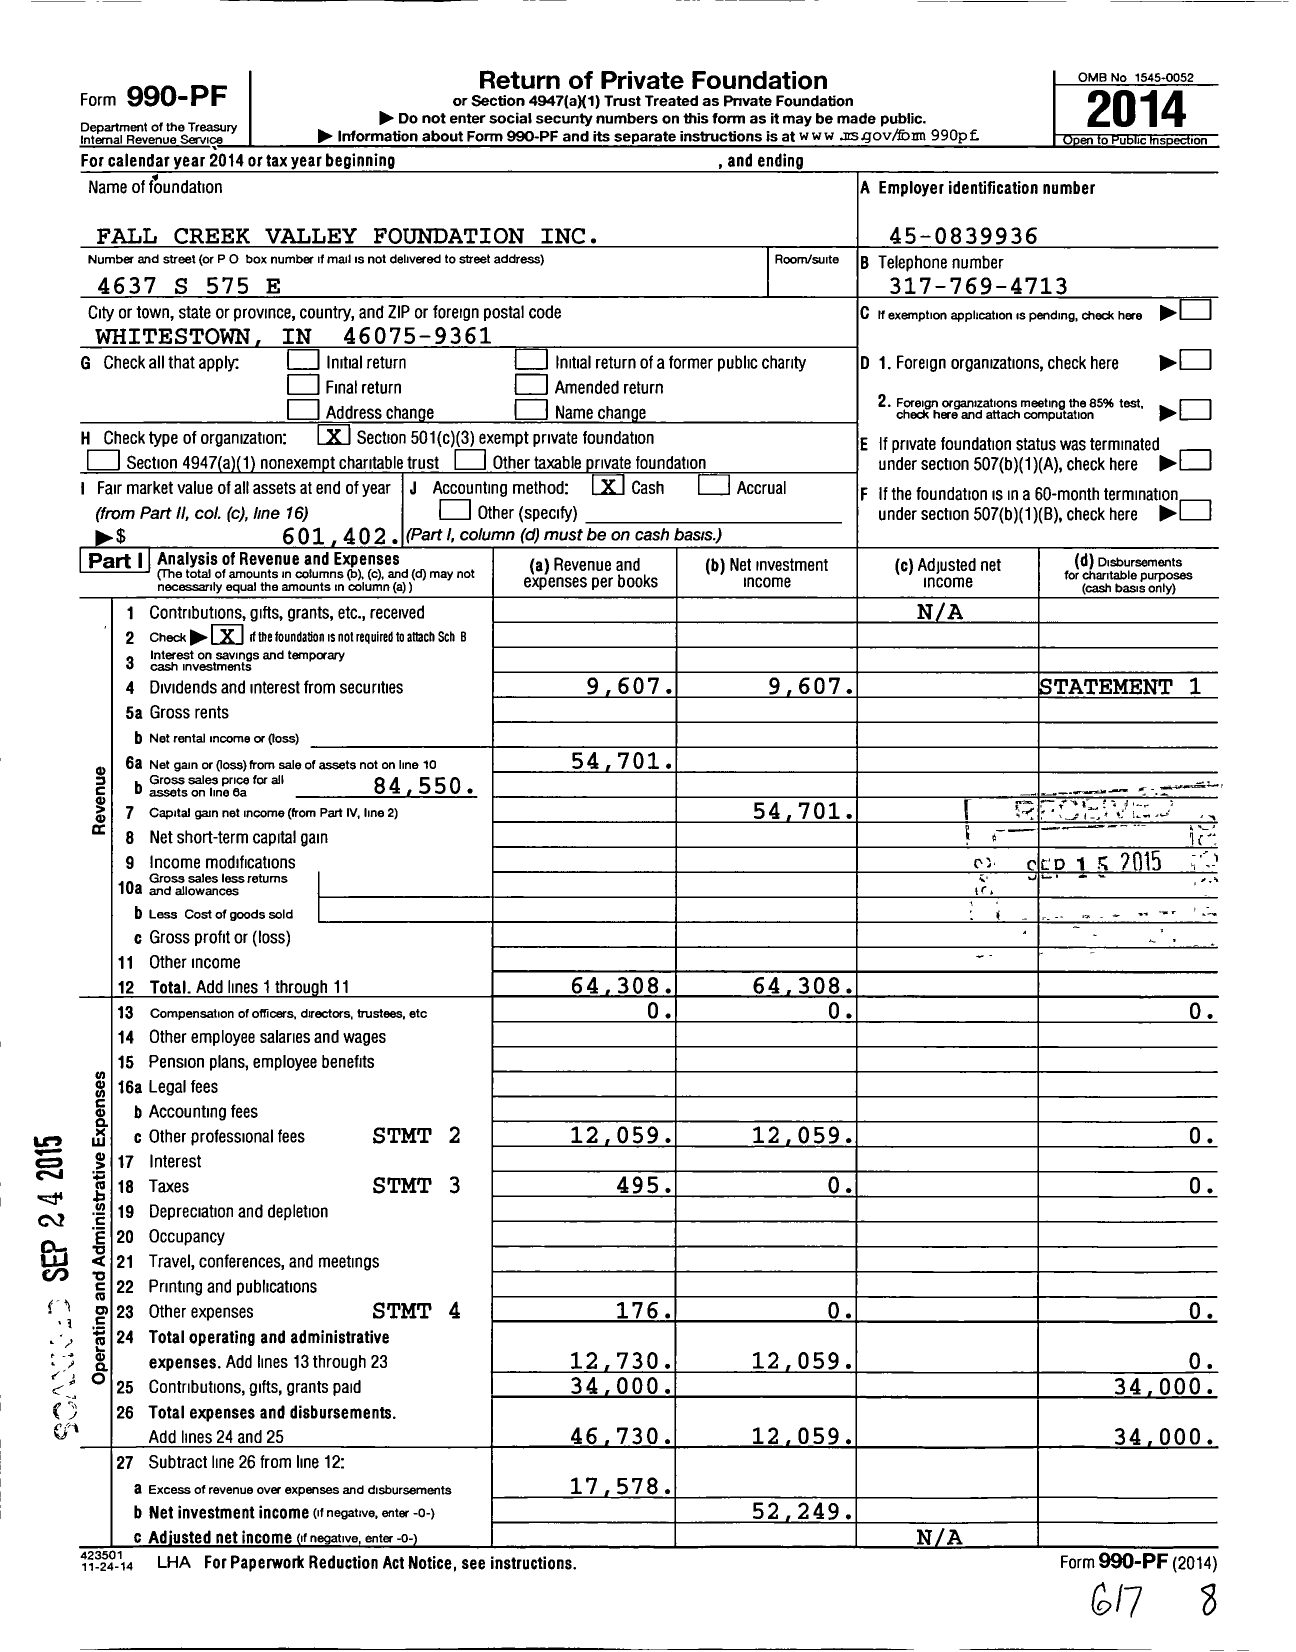 Image of first page of 2014 Form 990PF for Fall Creek Valley Foundation